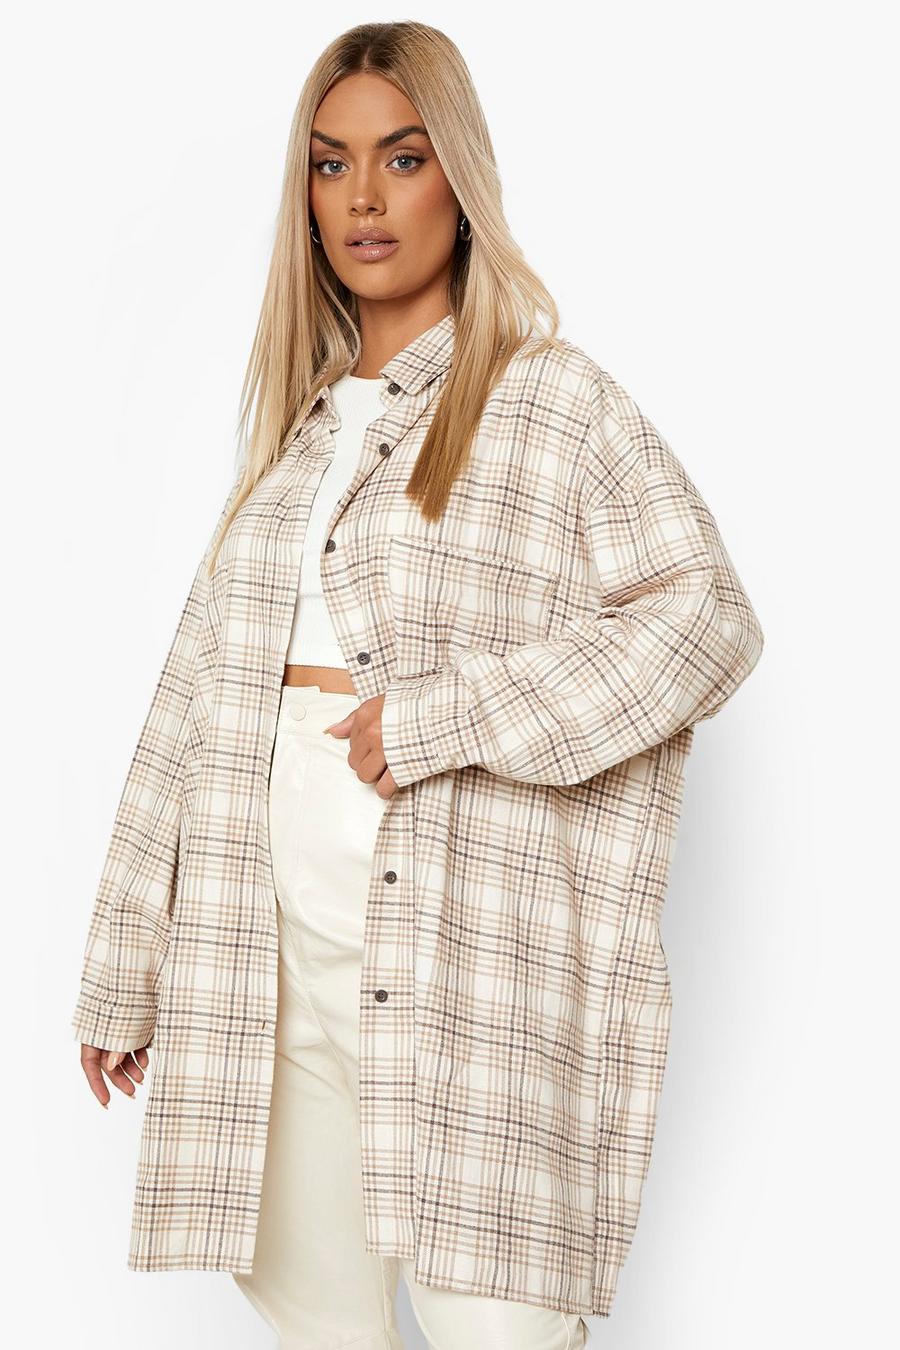 Oversized Flannel Shirt  Plaid shirt outfits, Oversized checked shirt, Flannel  women